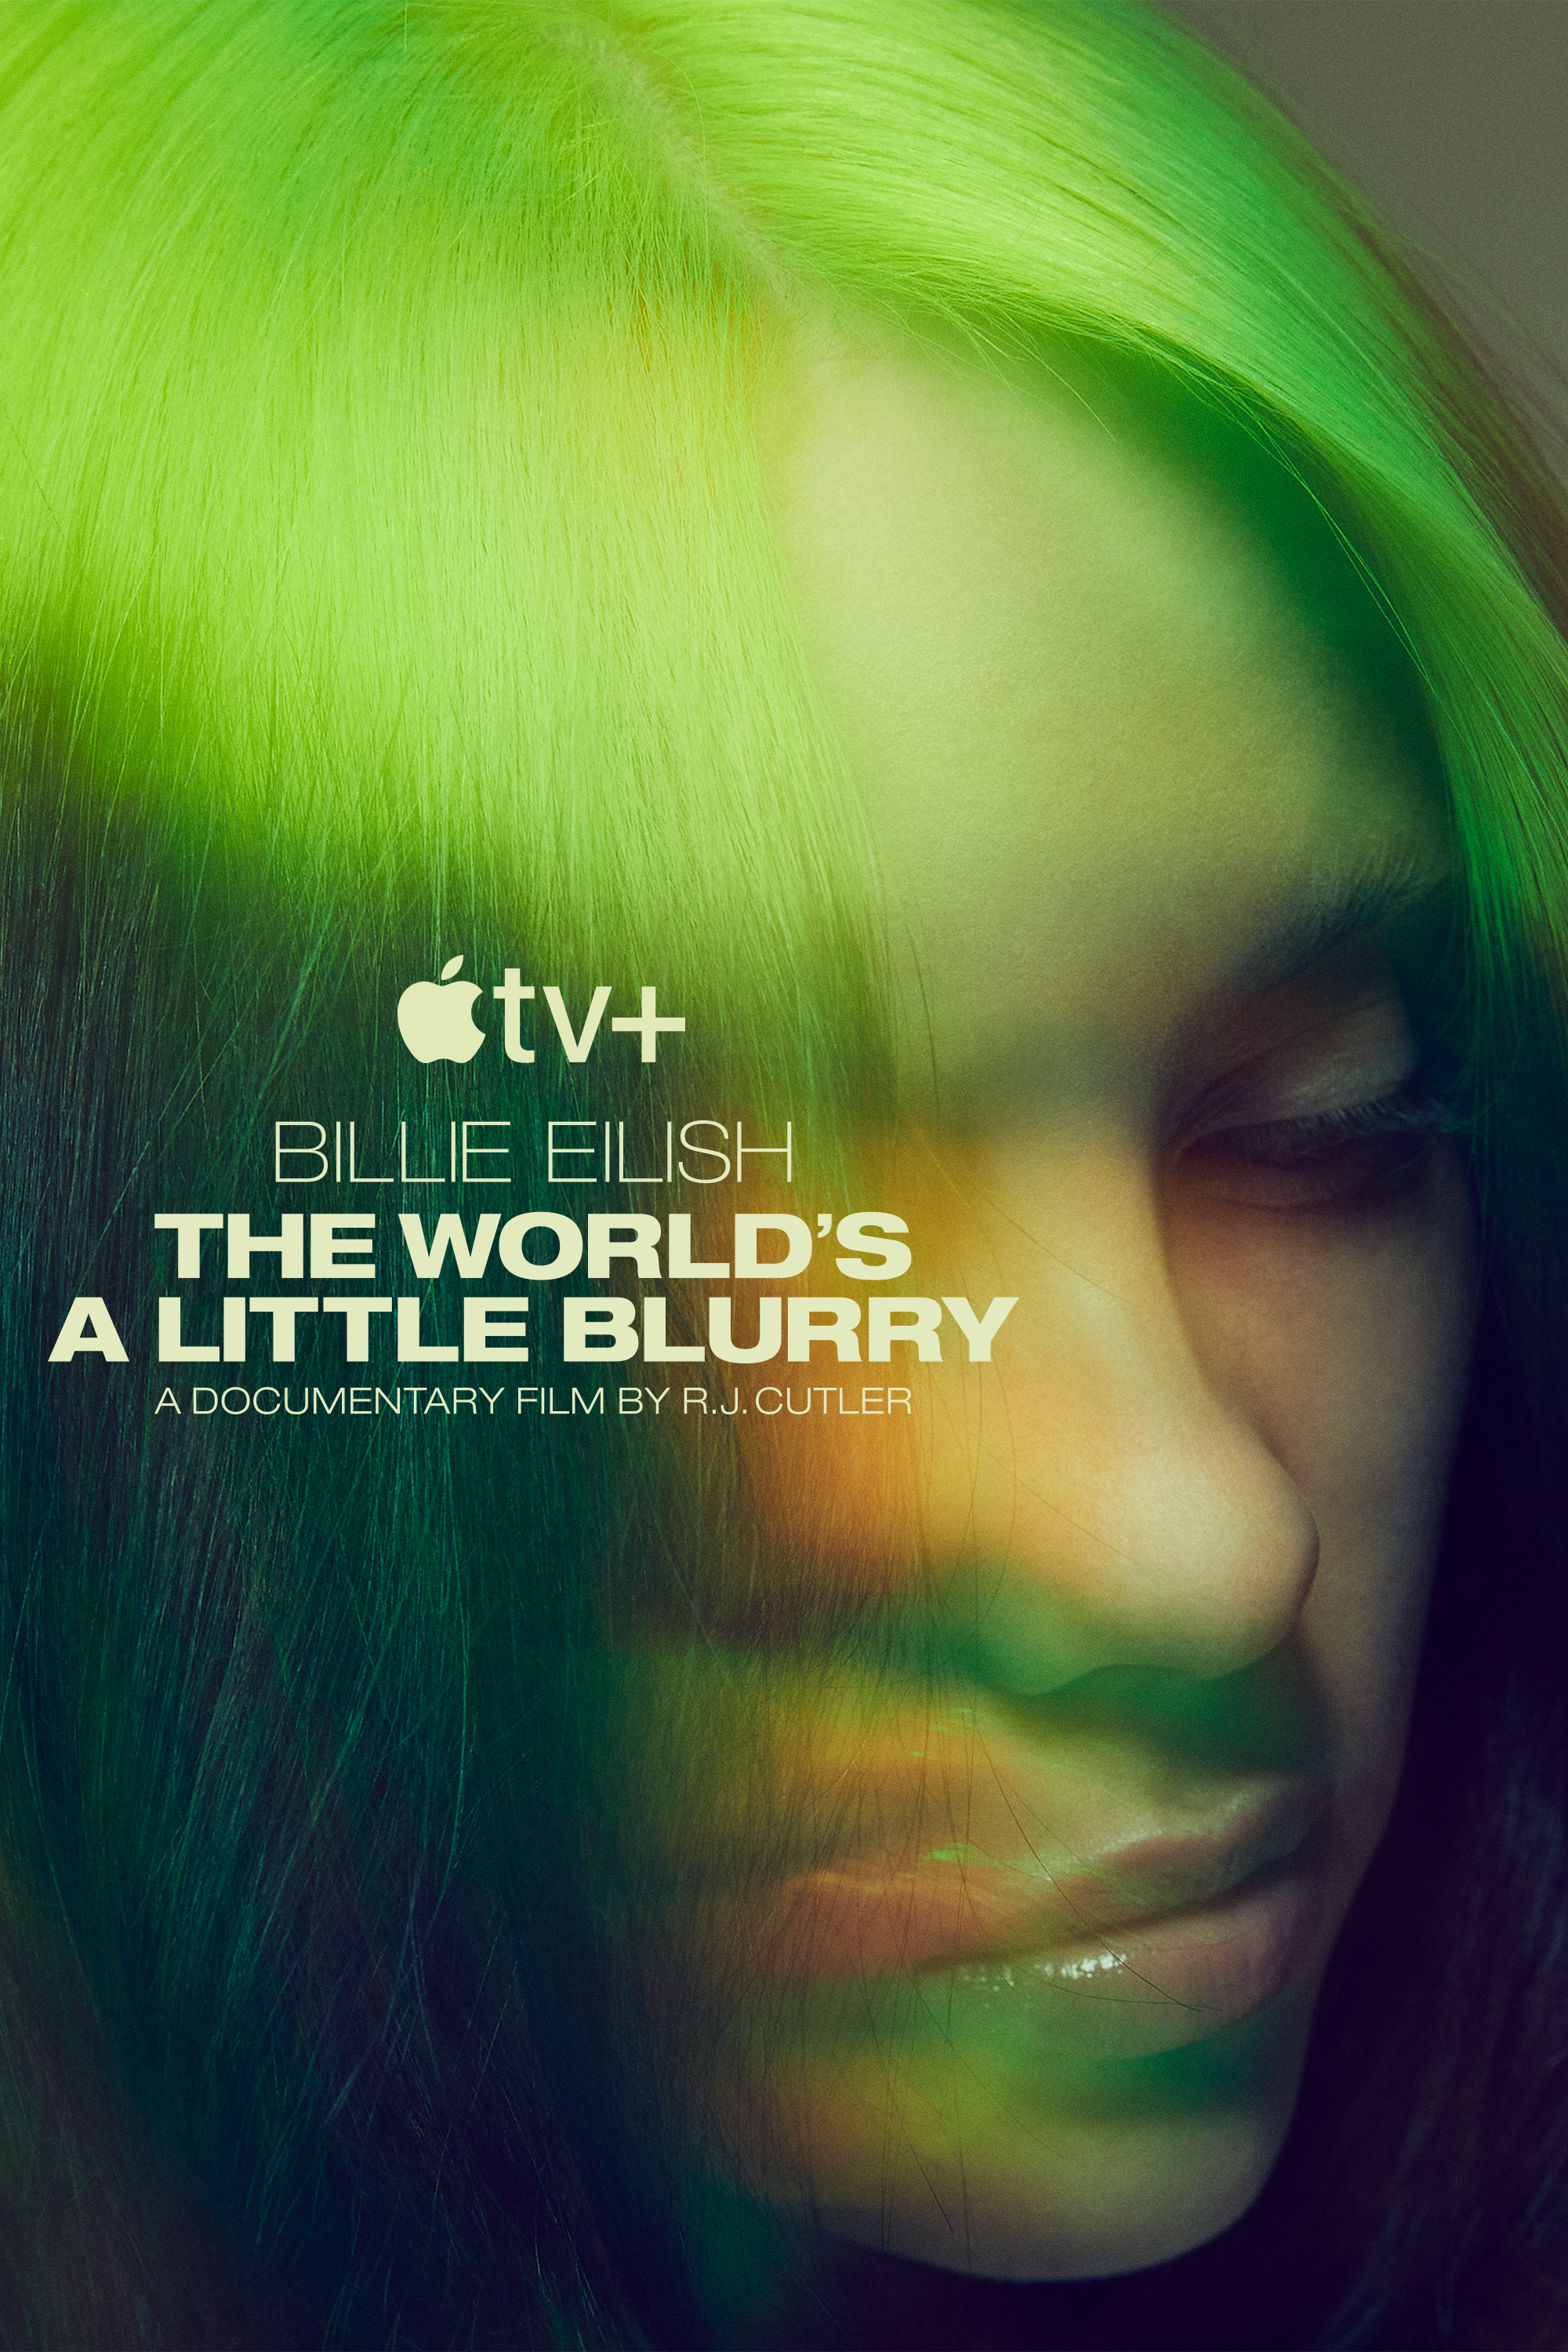 billie-eilish-the-worlds-a-little-blurry-apple-tv-plus-poster-high-res